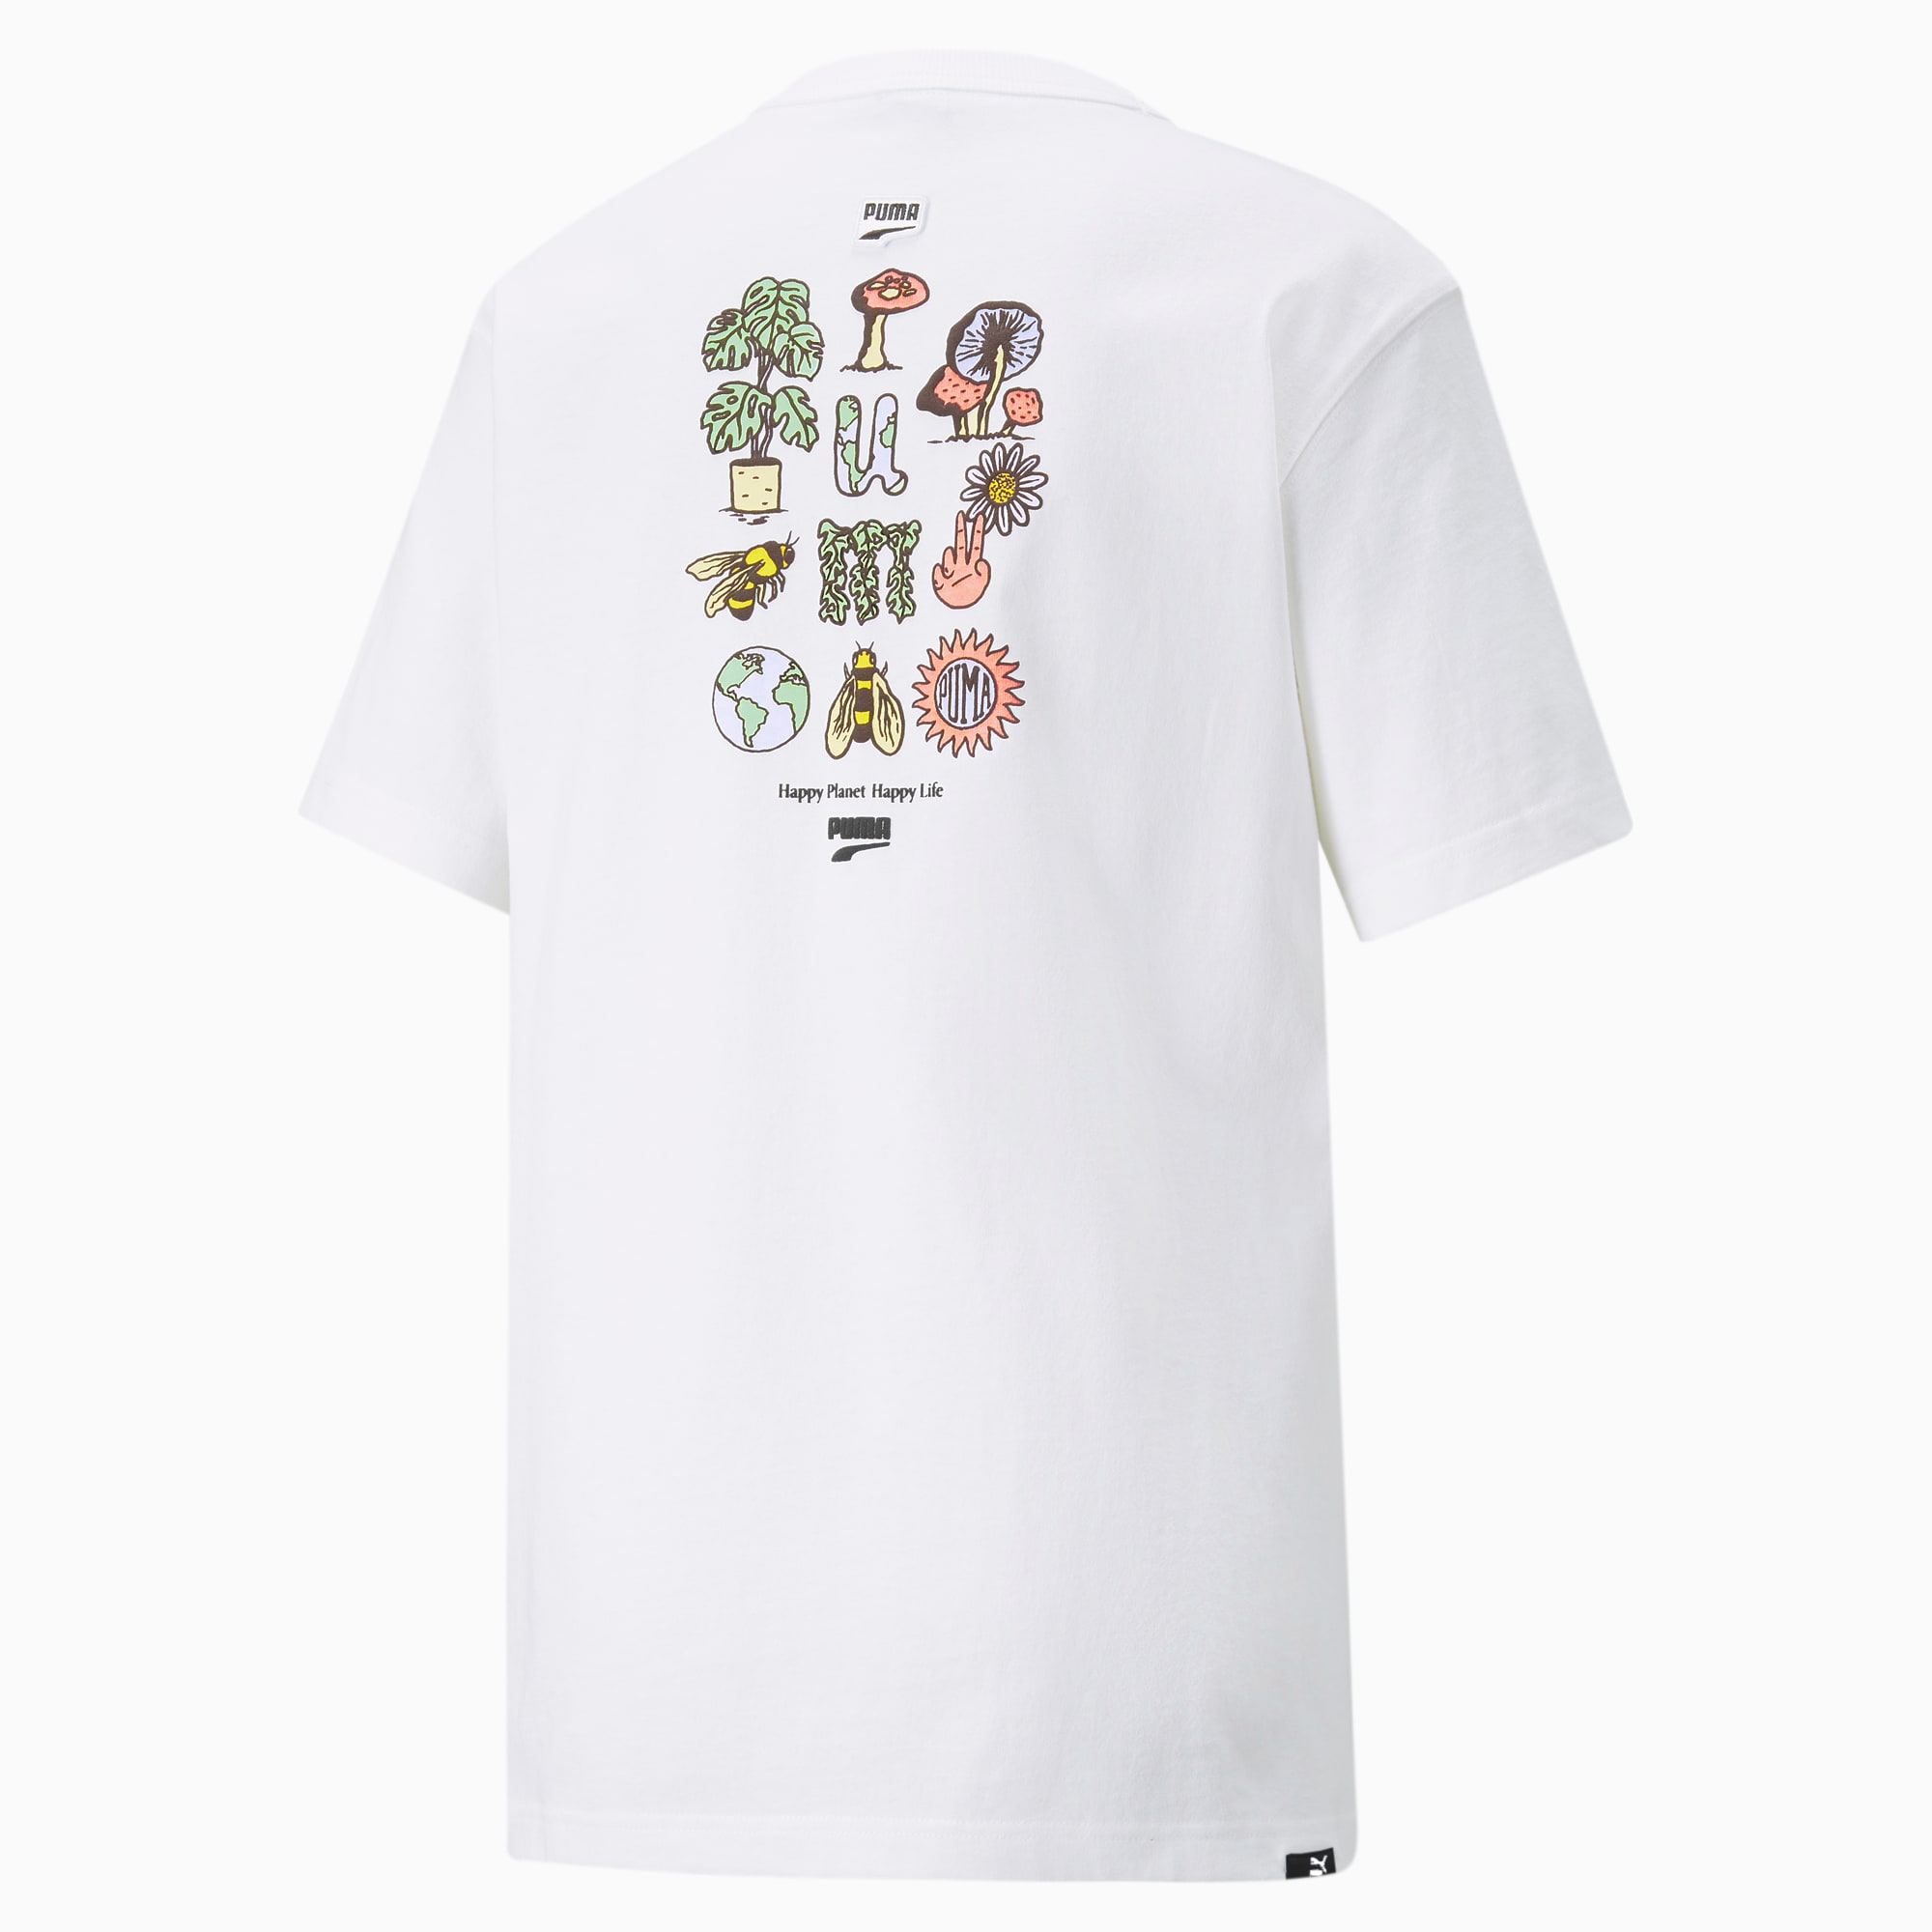 Downtown Relaxed Graphic Women's Tee | PUMA